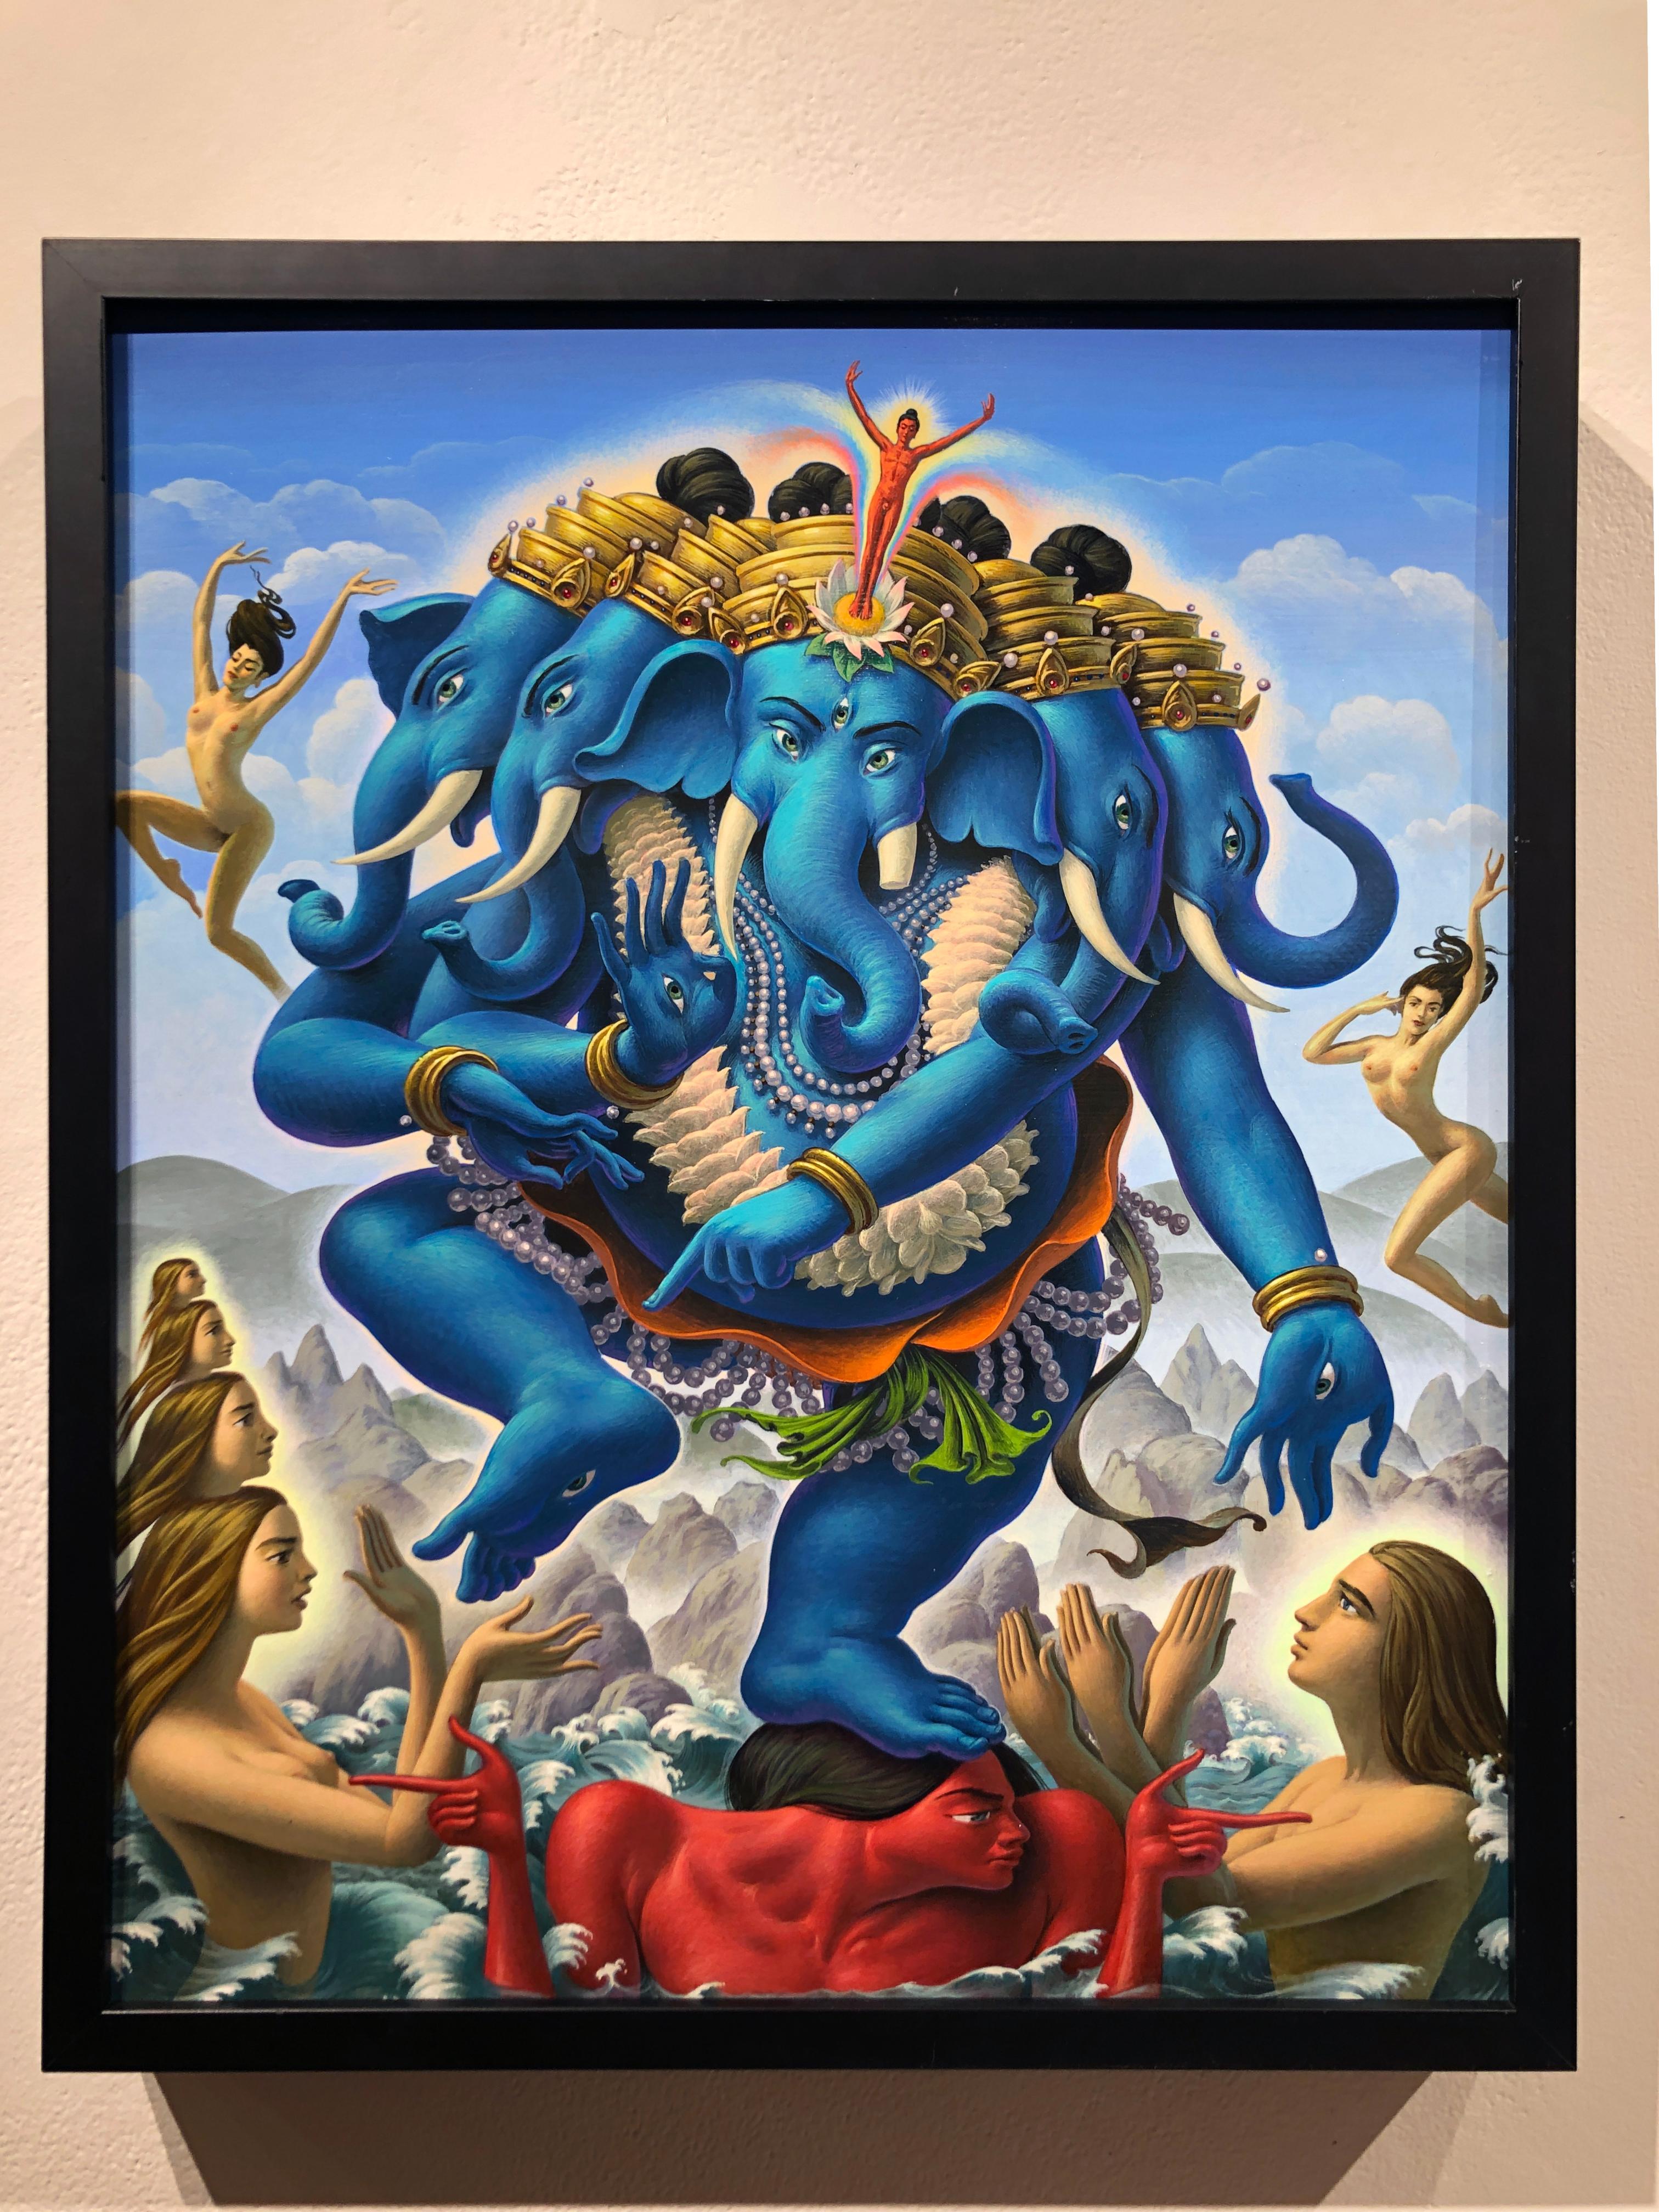 Ganesh at the Maelstrom - Highly Detailed Surreal, Symbolic Painting - Gray Animal Painting by Oliver Hazard Benson